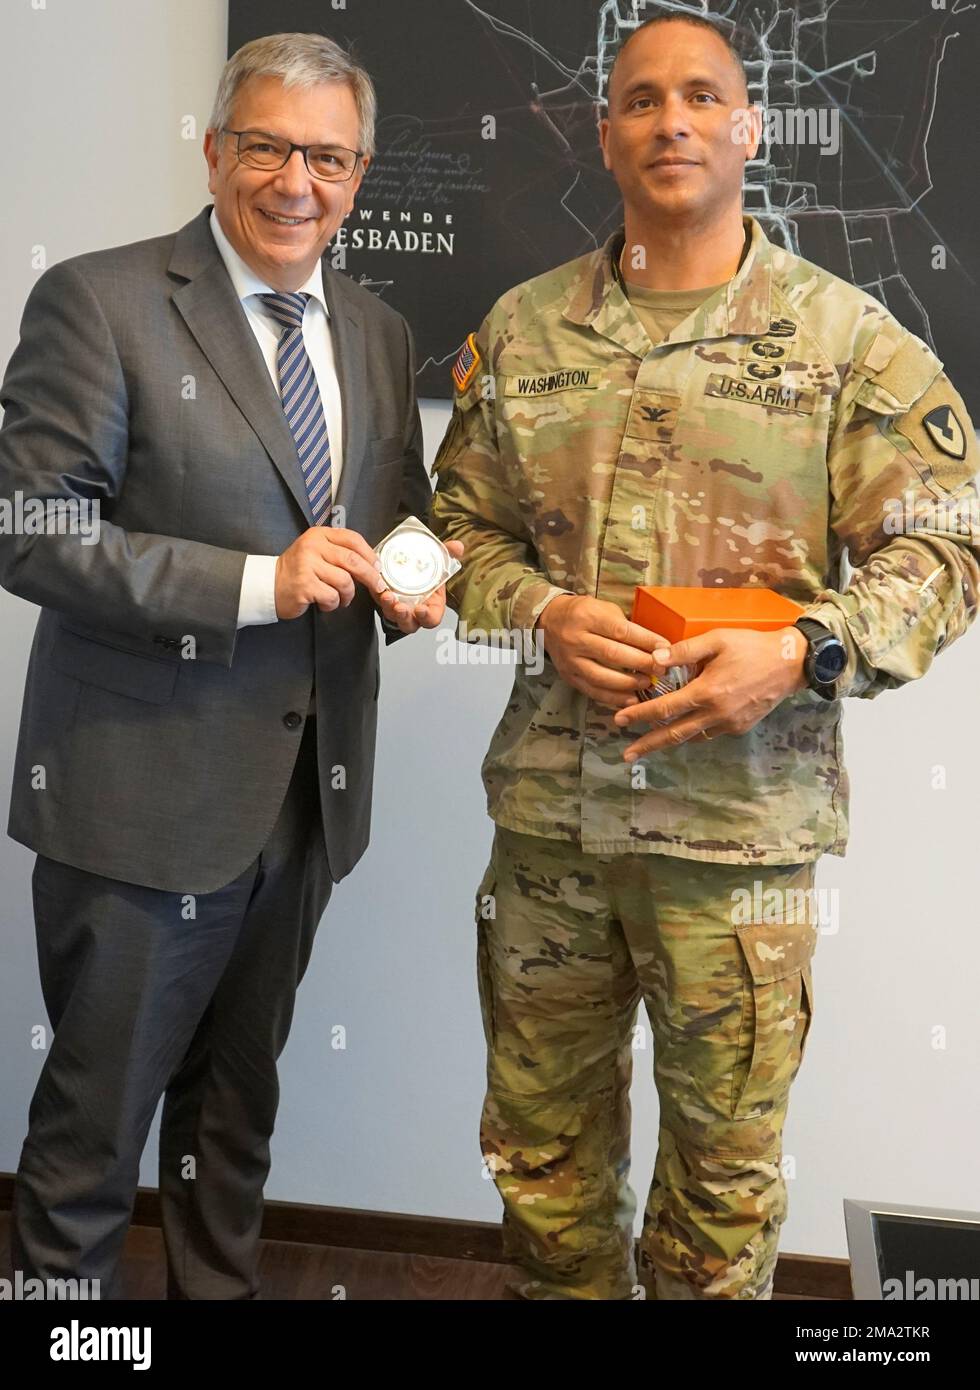 WIESBADEN, Germany -- Lord Mayor of Wiesbaden, Gert-Uwe Mende, thanked Colonel Mario A. Washington with a little piece of “Sinter” in memory to the 65 Celsius hot spring in Wiesbaden on 24 May 2022. (Reference U.S. Army Garrison Wiesbaden Roland Schedel) Stock Photo